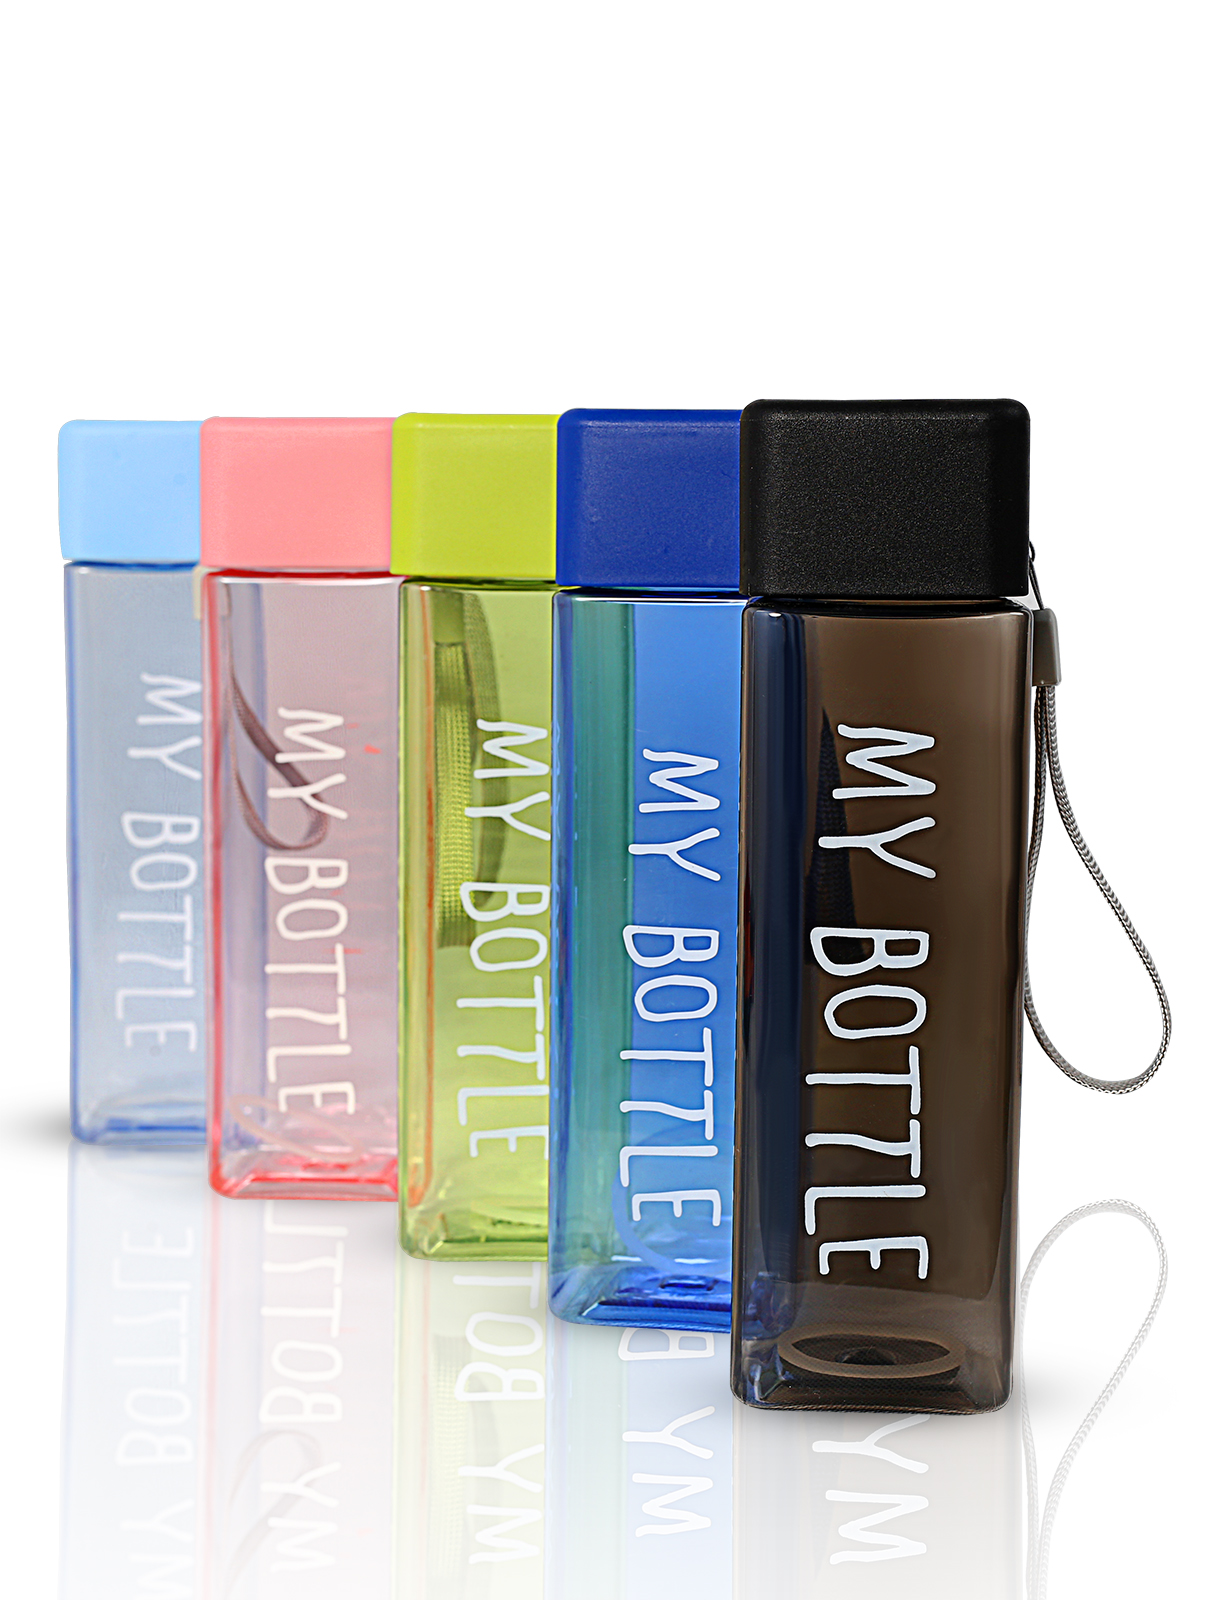 Square water bottle in multiple colors